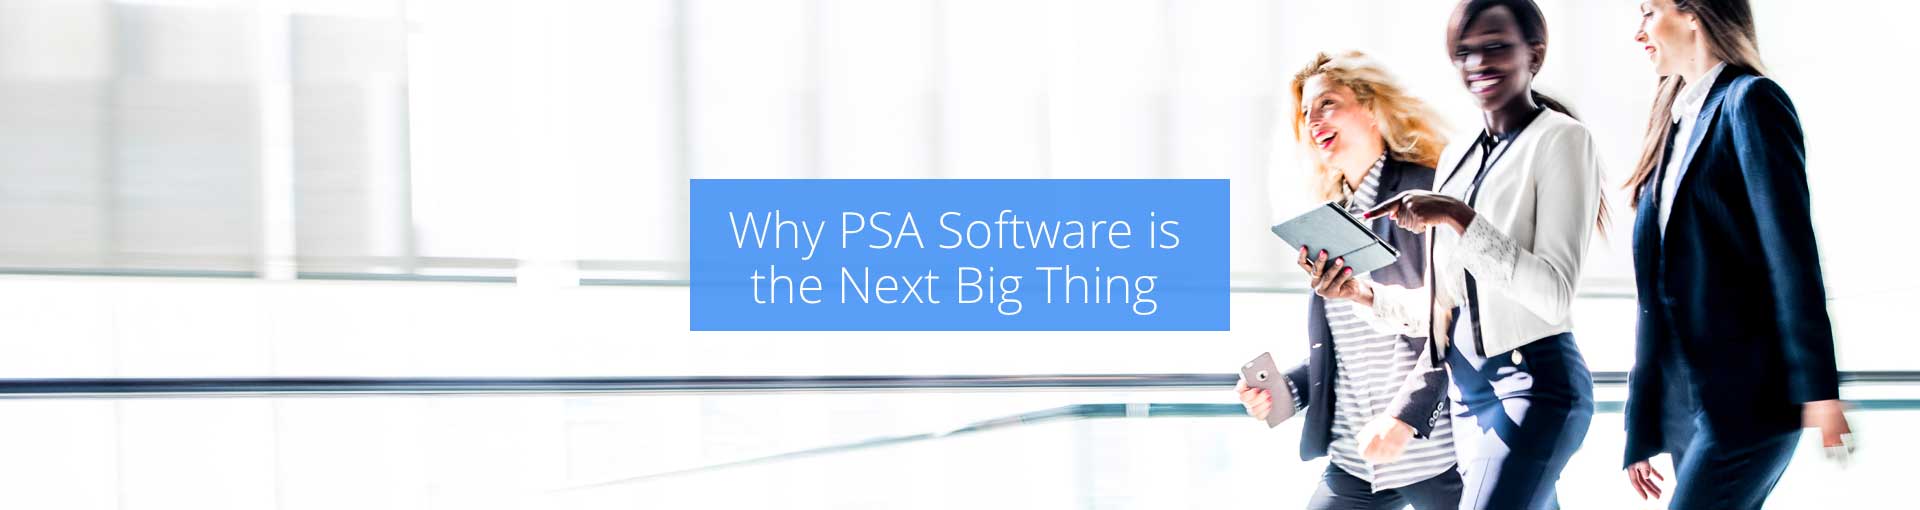 PSA Software - The Next Generation Featured Image